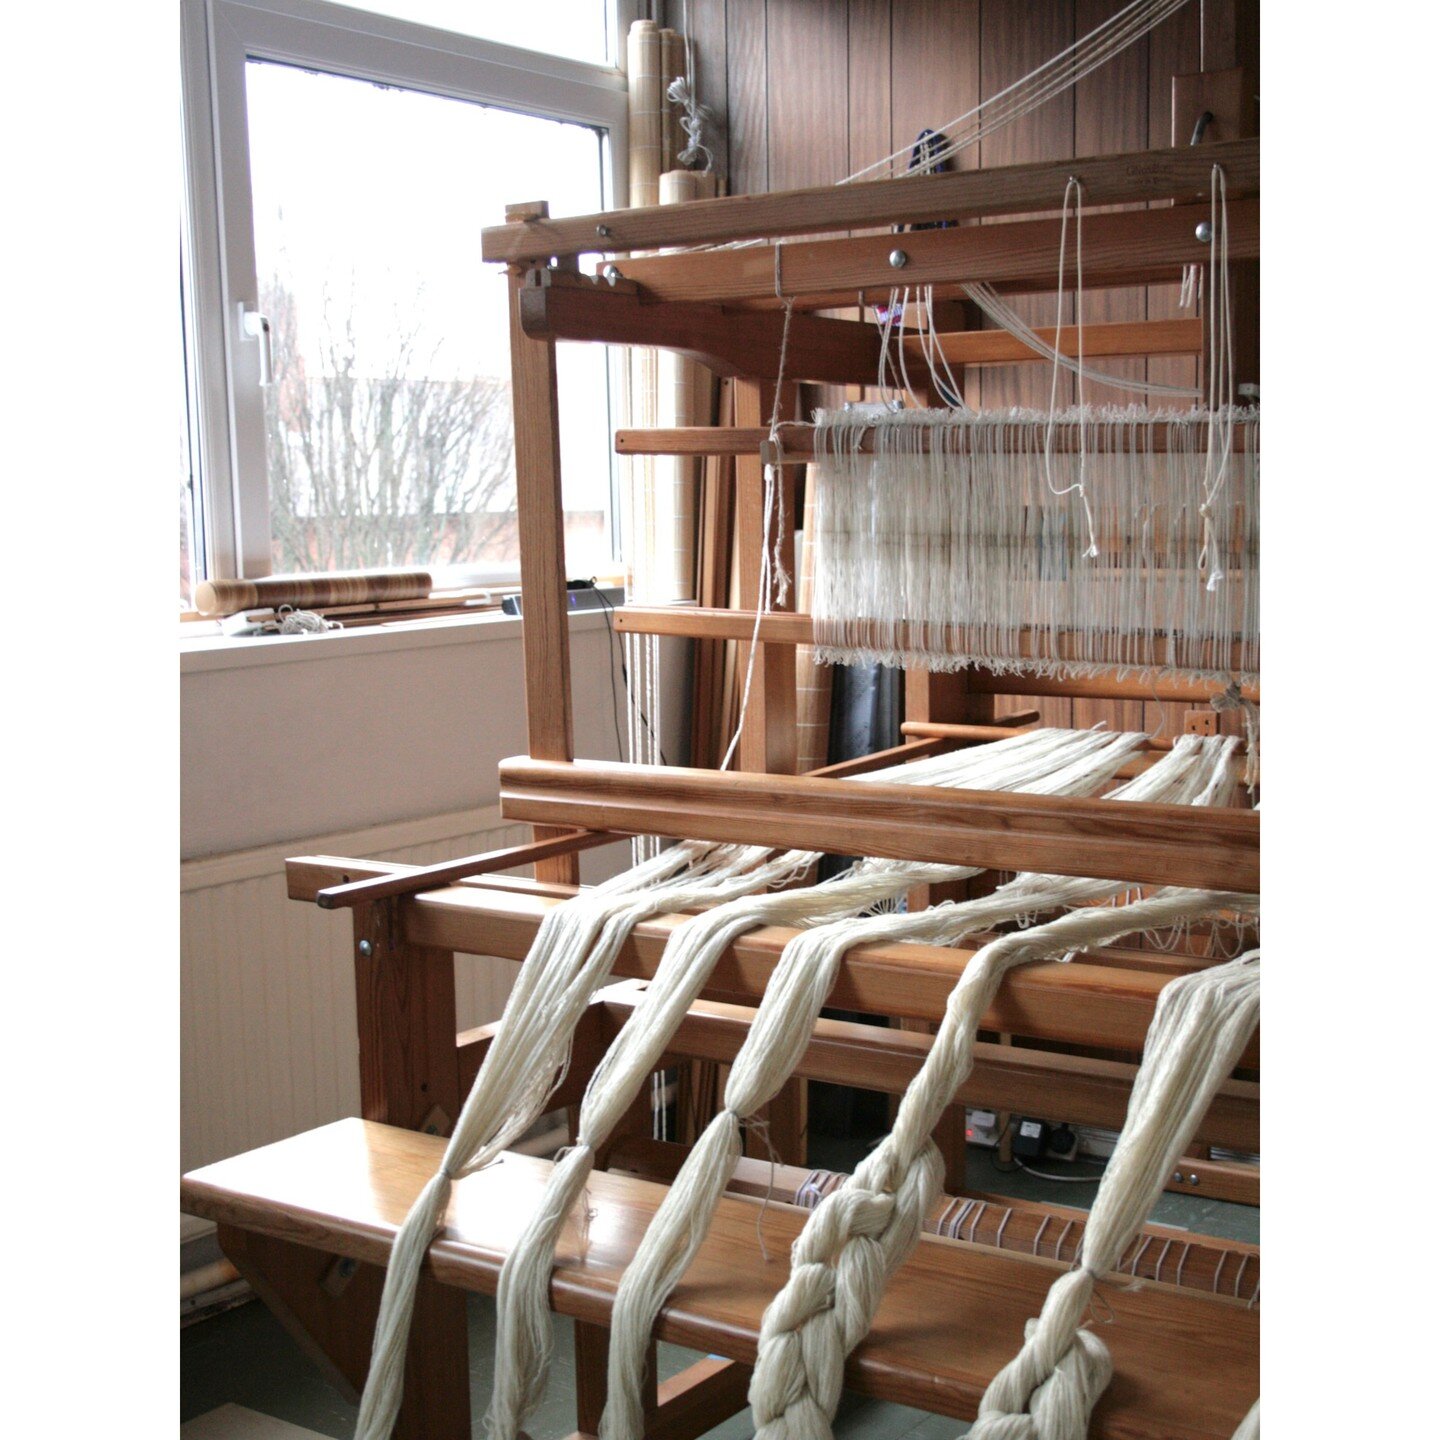 Winding down...
A couple of weeks ago I said goodbye to my studio space on Hopefield Avenue that has been the home for my big looms since I launched Olla Nua back in late 2015.

It was sad to think that I won't be weaving there again, but I'm excited